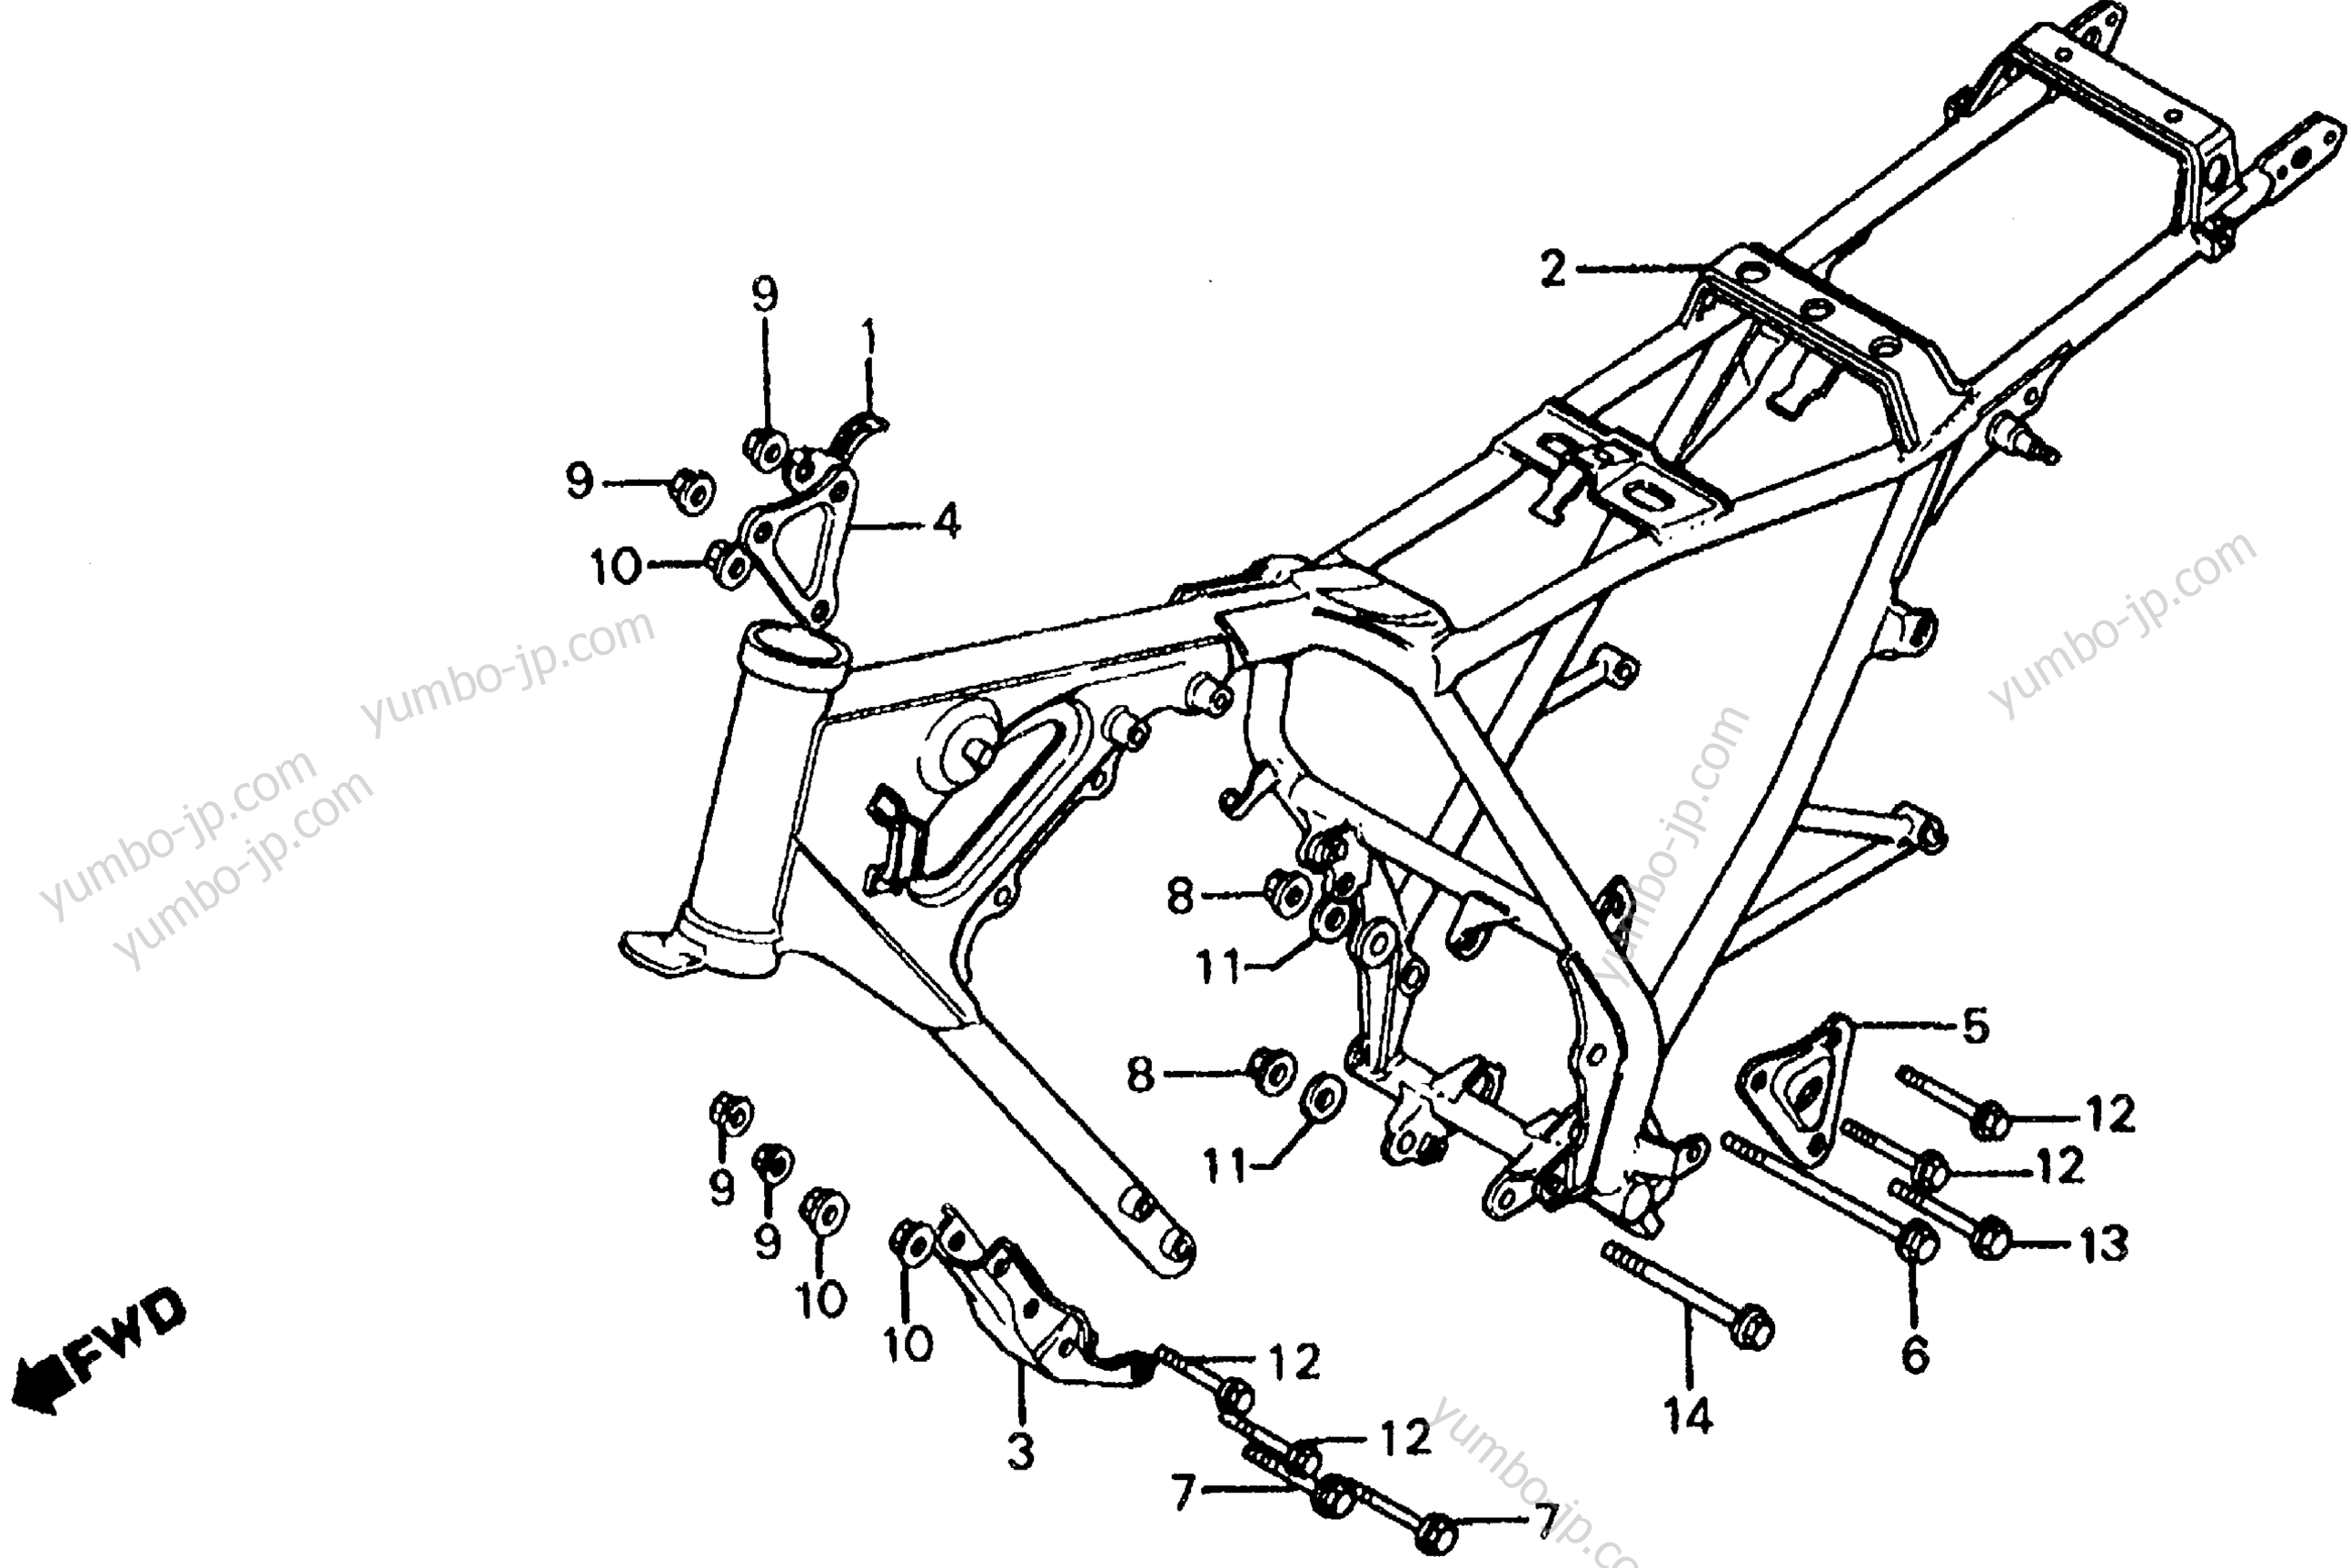 FRAME for motorcycles HONDA FT500 A 1983 year